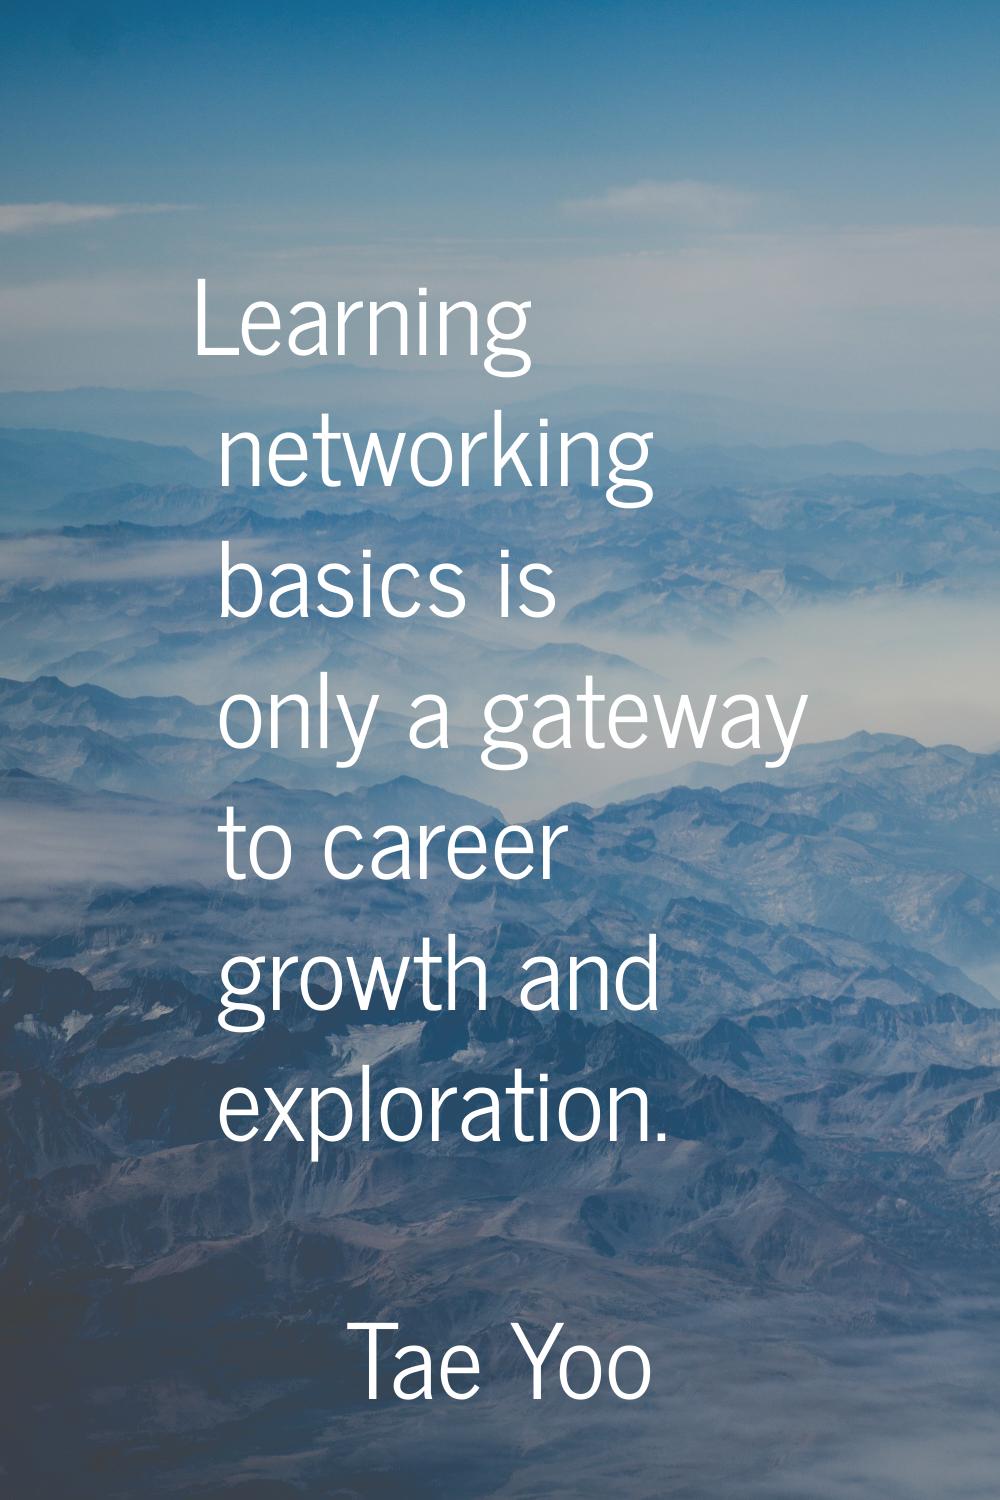 Learning networking basics is only a gateway to career growth and exploration.